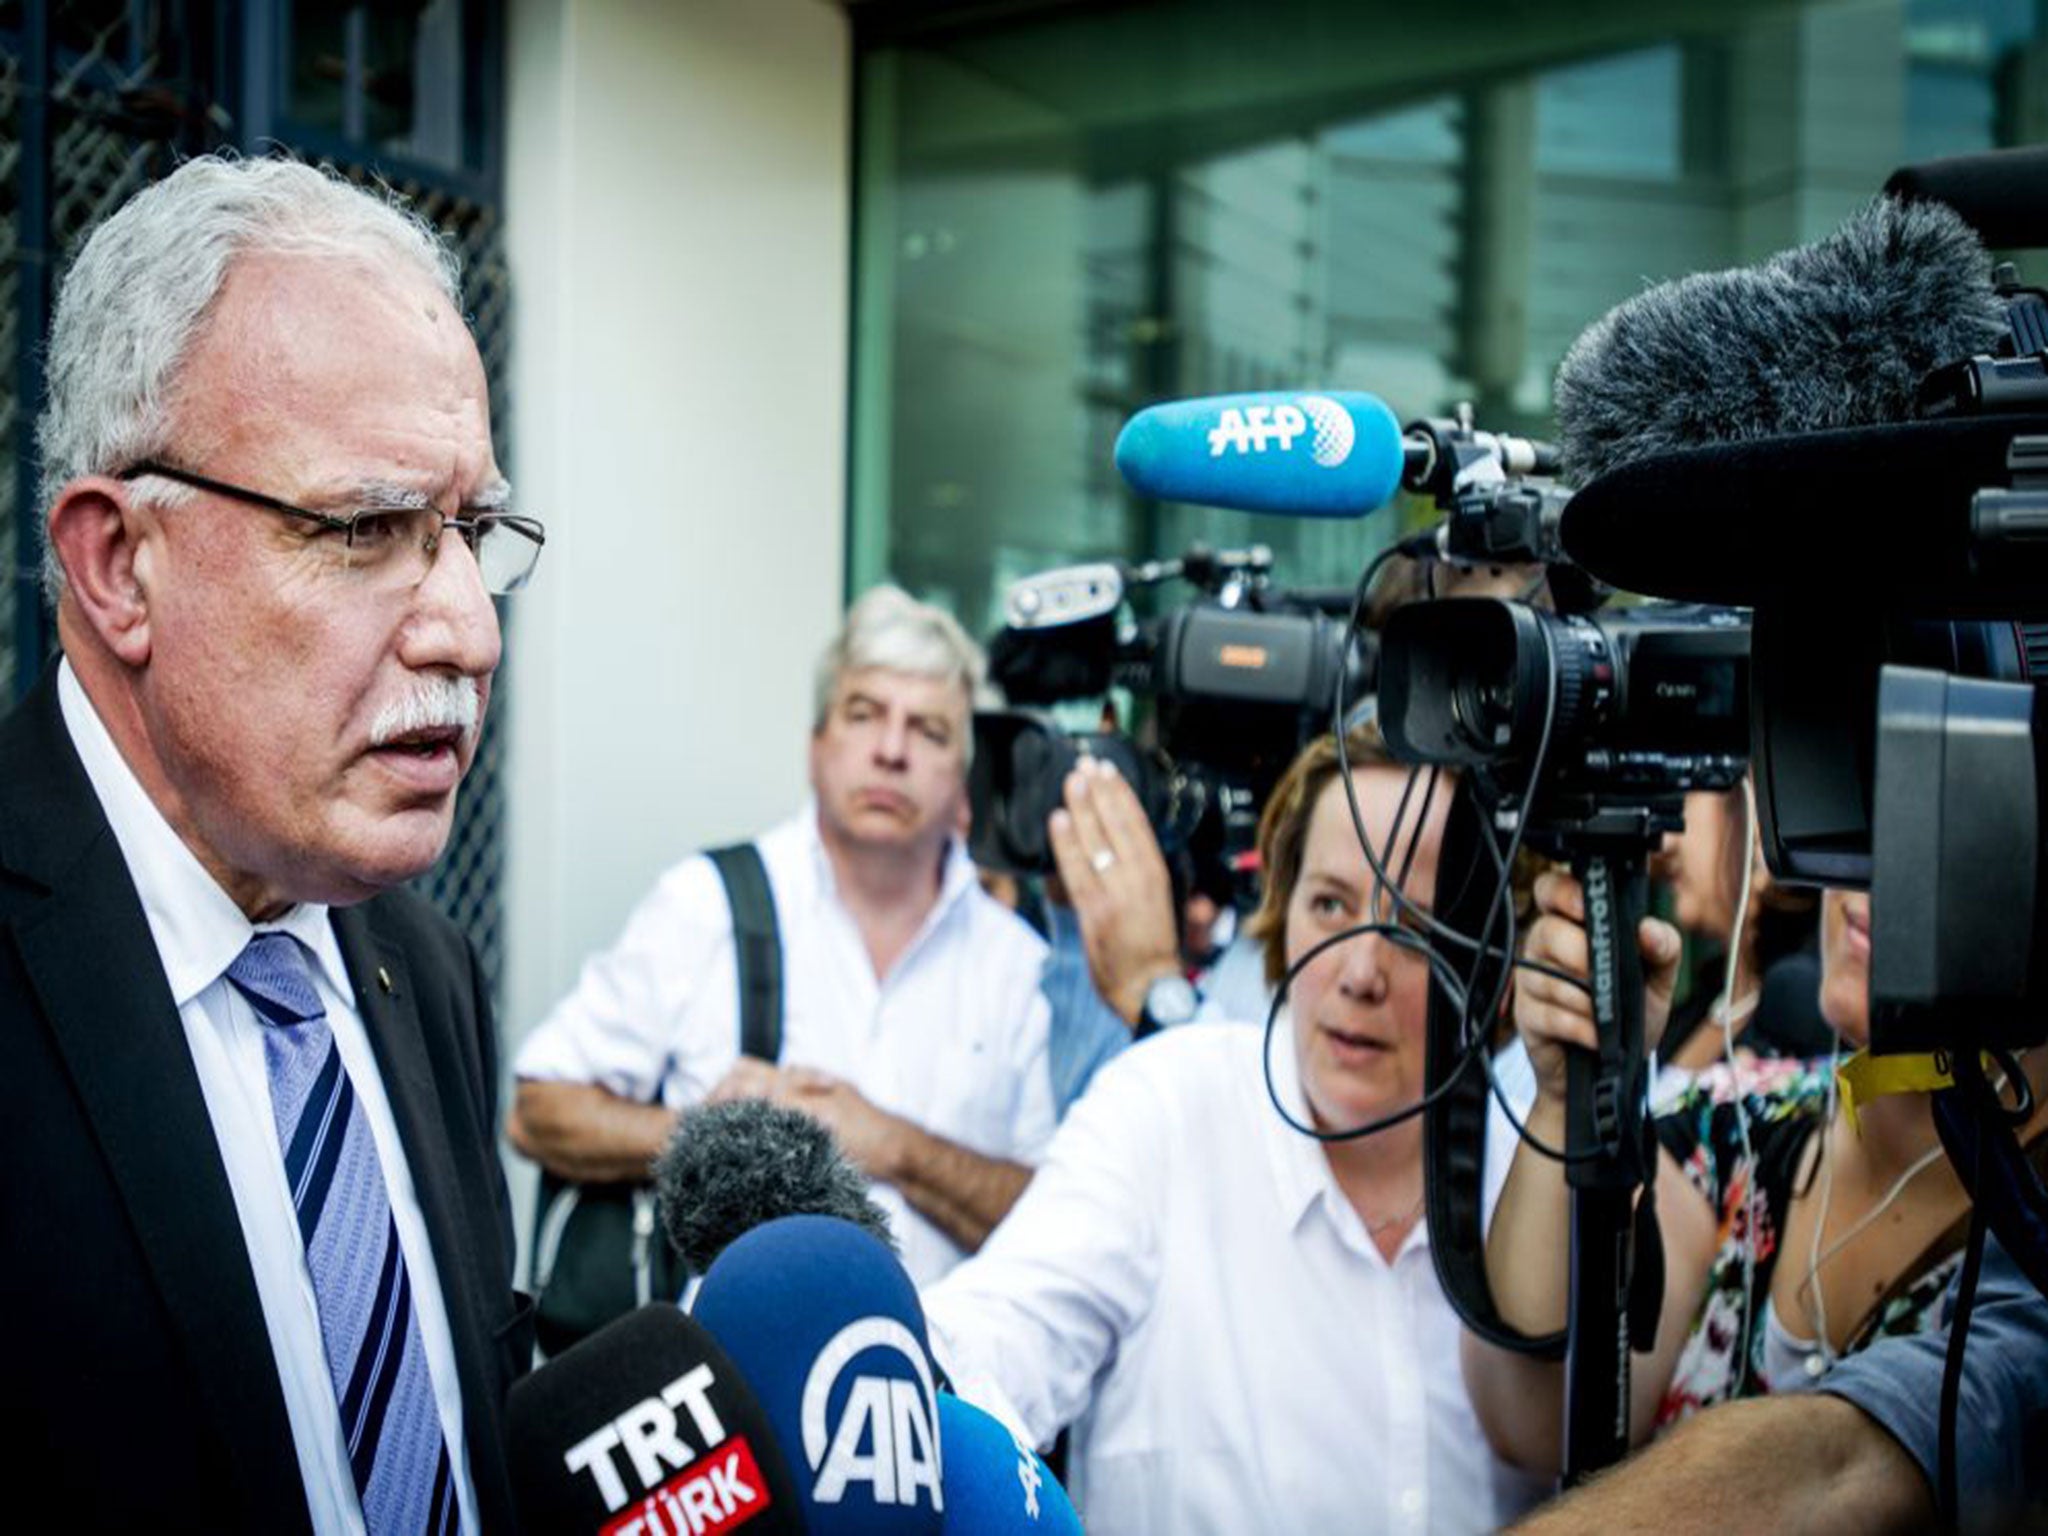 Palestinian foreign minister Riyad al-Maliki speaks to reporters in Hague after leaving the International Criminal Court (ICC).